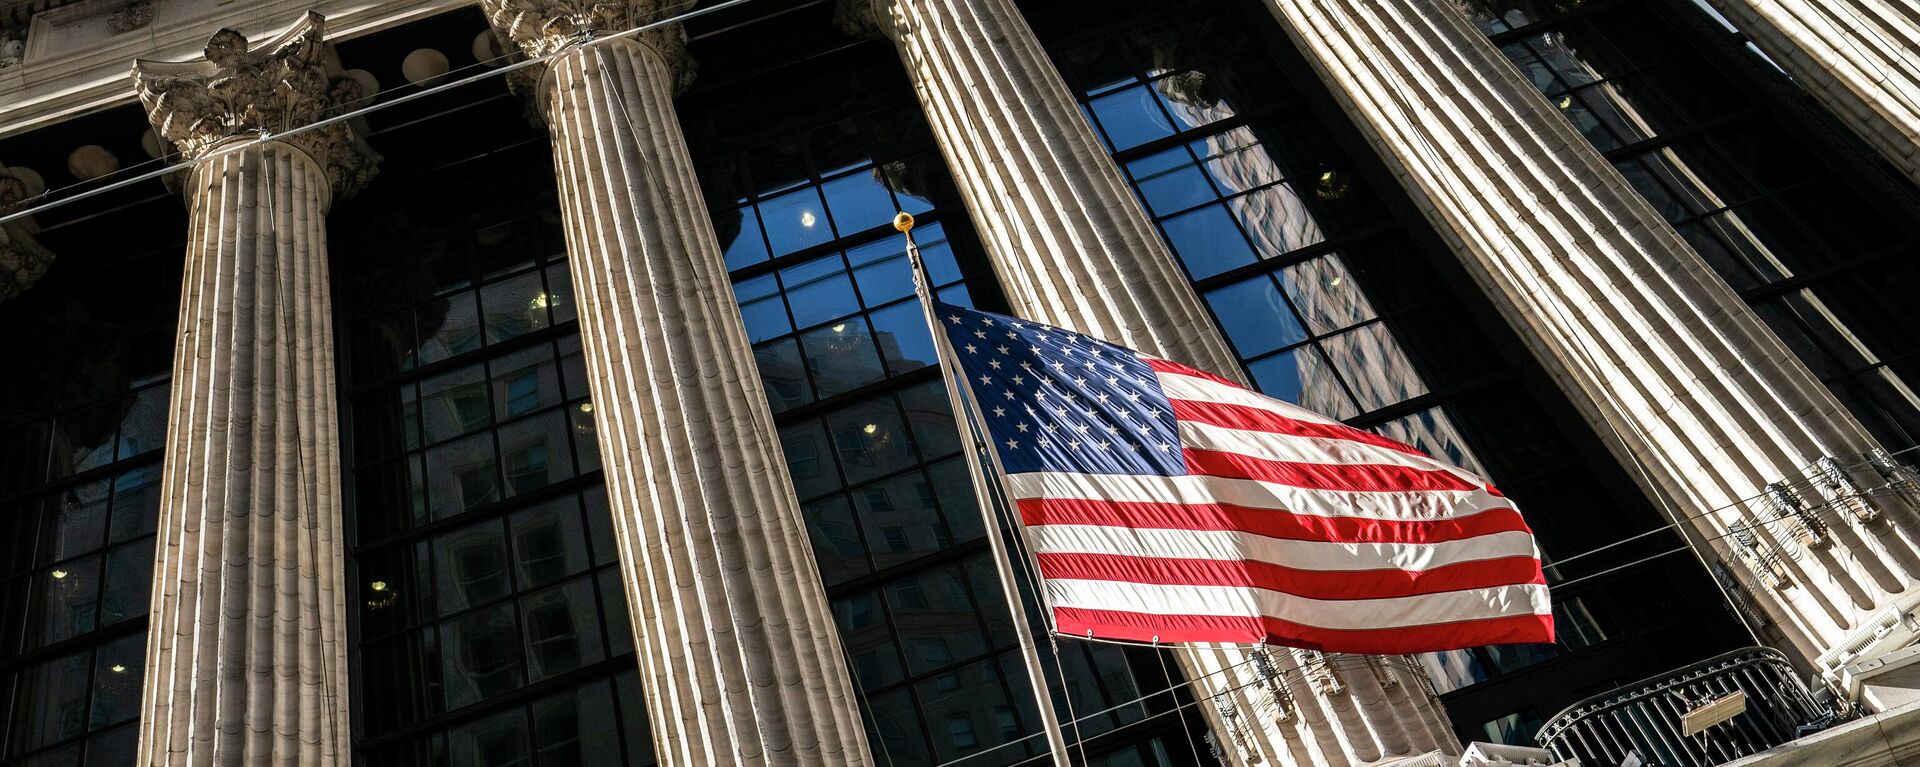 A U.S. flag waves outside the New York Stock Exchange, Monday, Jan. 24, 2022, in New York. Stocks are drifting between small gains and losses in the early going on Wall Street Tuesday, May 3, 2022 as investors await Wednesday's decision by the Federal Reserve on interest rates. The Fed is expected to raise its benchmark rate by twice the usual amount this week as it steps up its fight against inflation, which is at a four-decade high. - Sputnik International, 1920, 07.03.2023